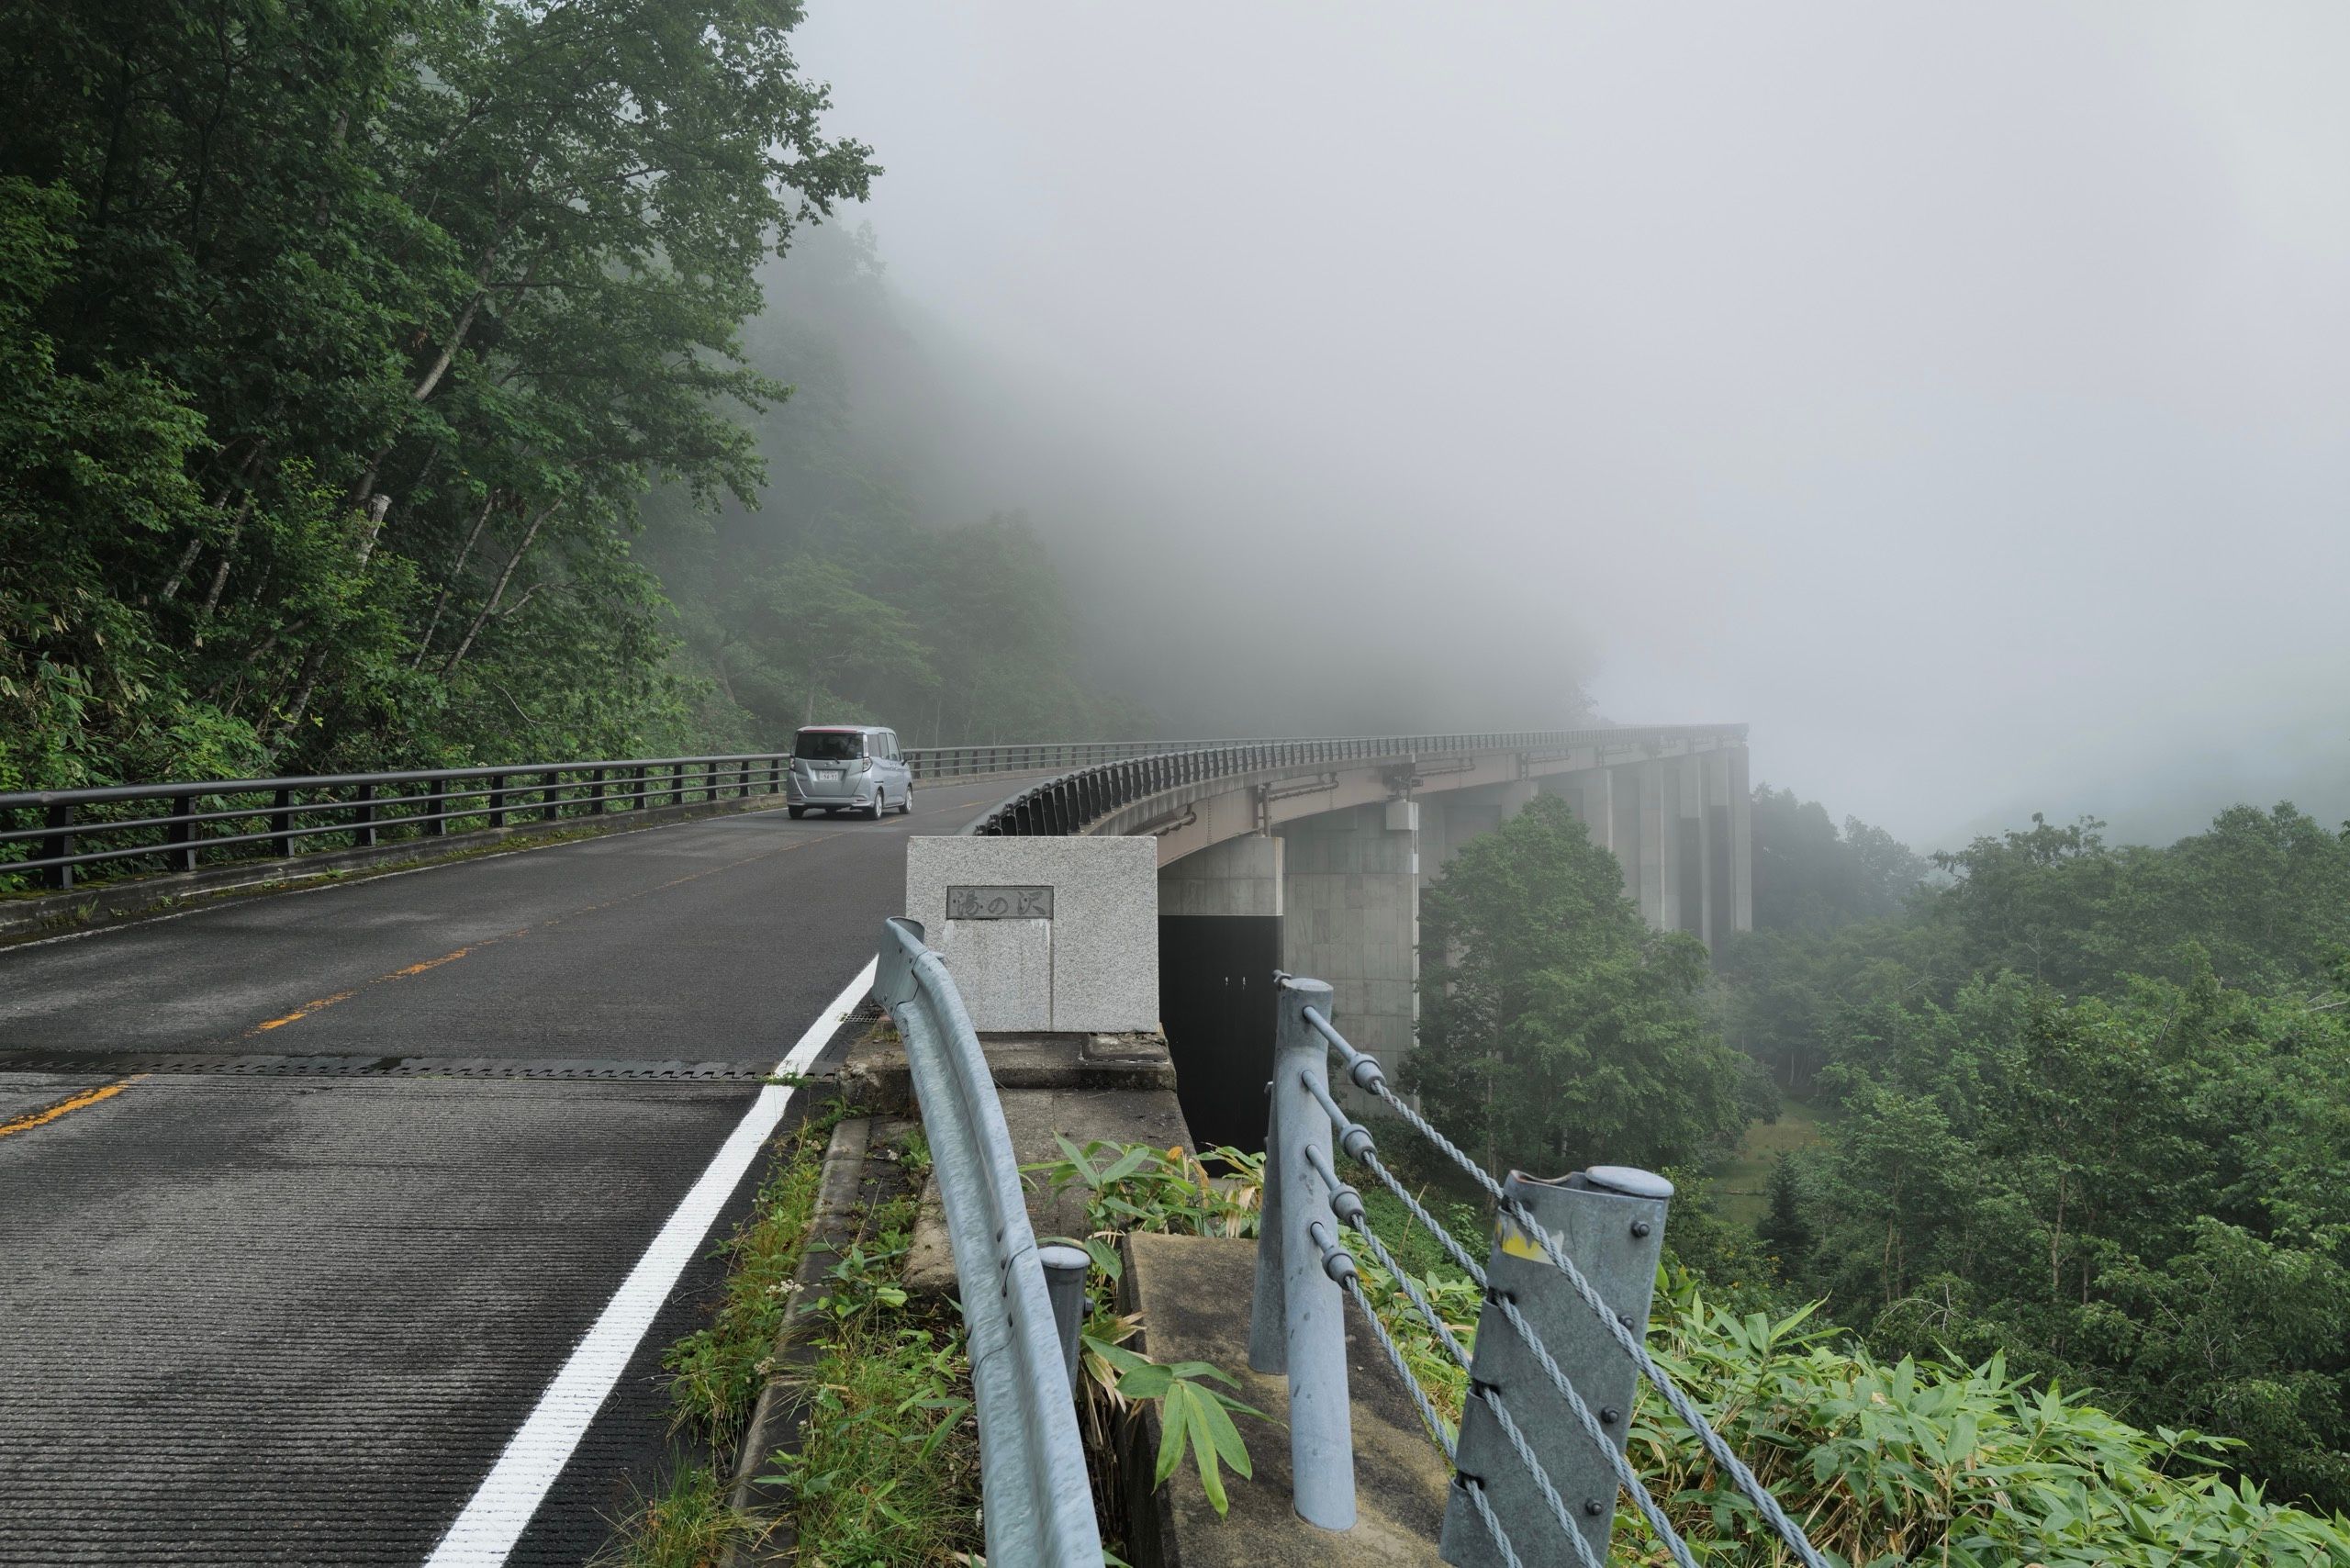 A bridge on a mountain road disappears into the fog.